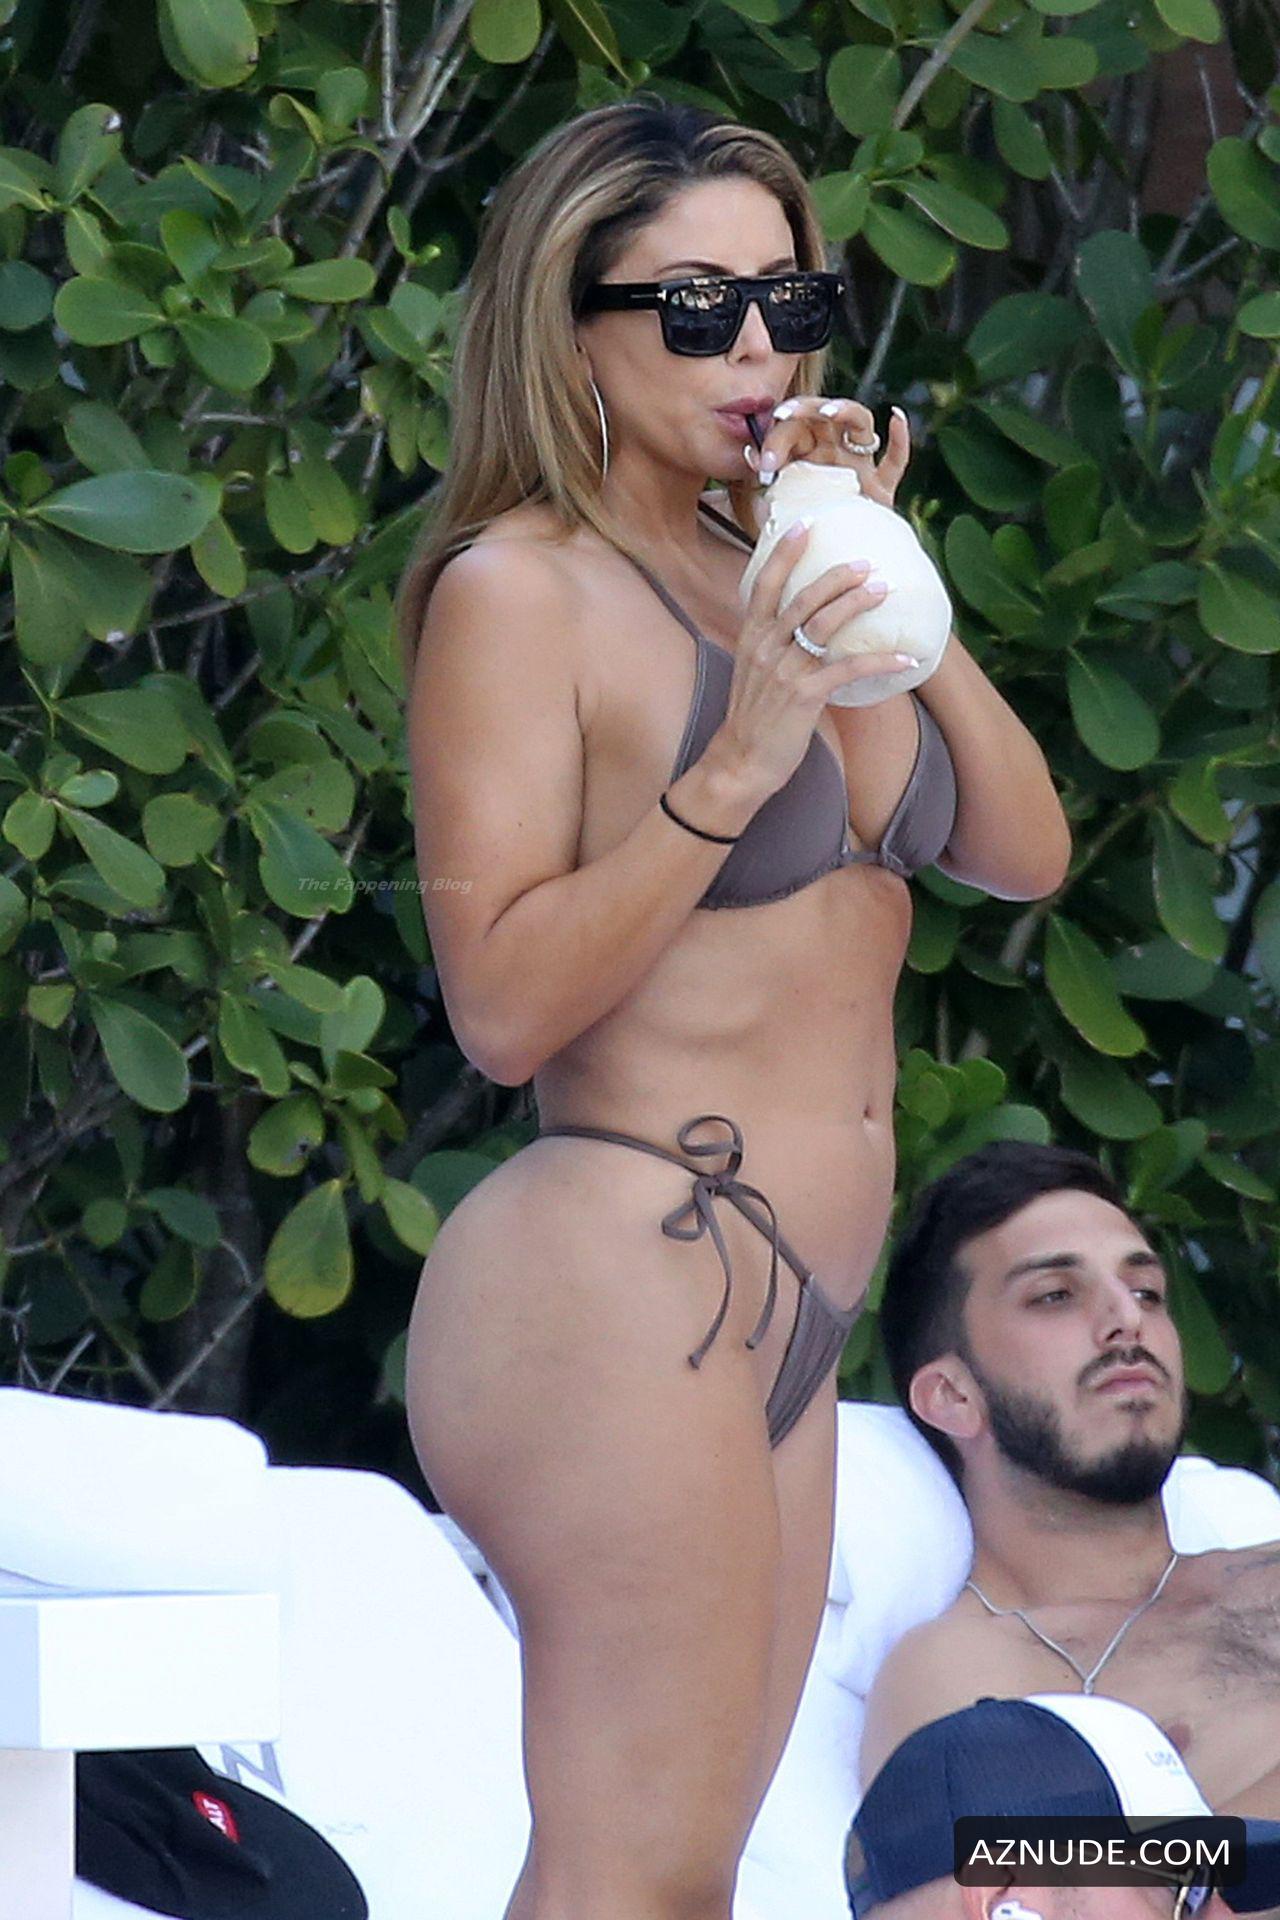 Larsa Pippen Sexy Relaxes by the Pool Showing Off Her Hot Bikini Body in  Miami - AZNude